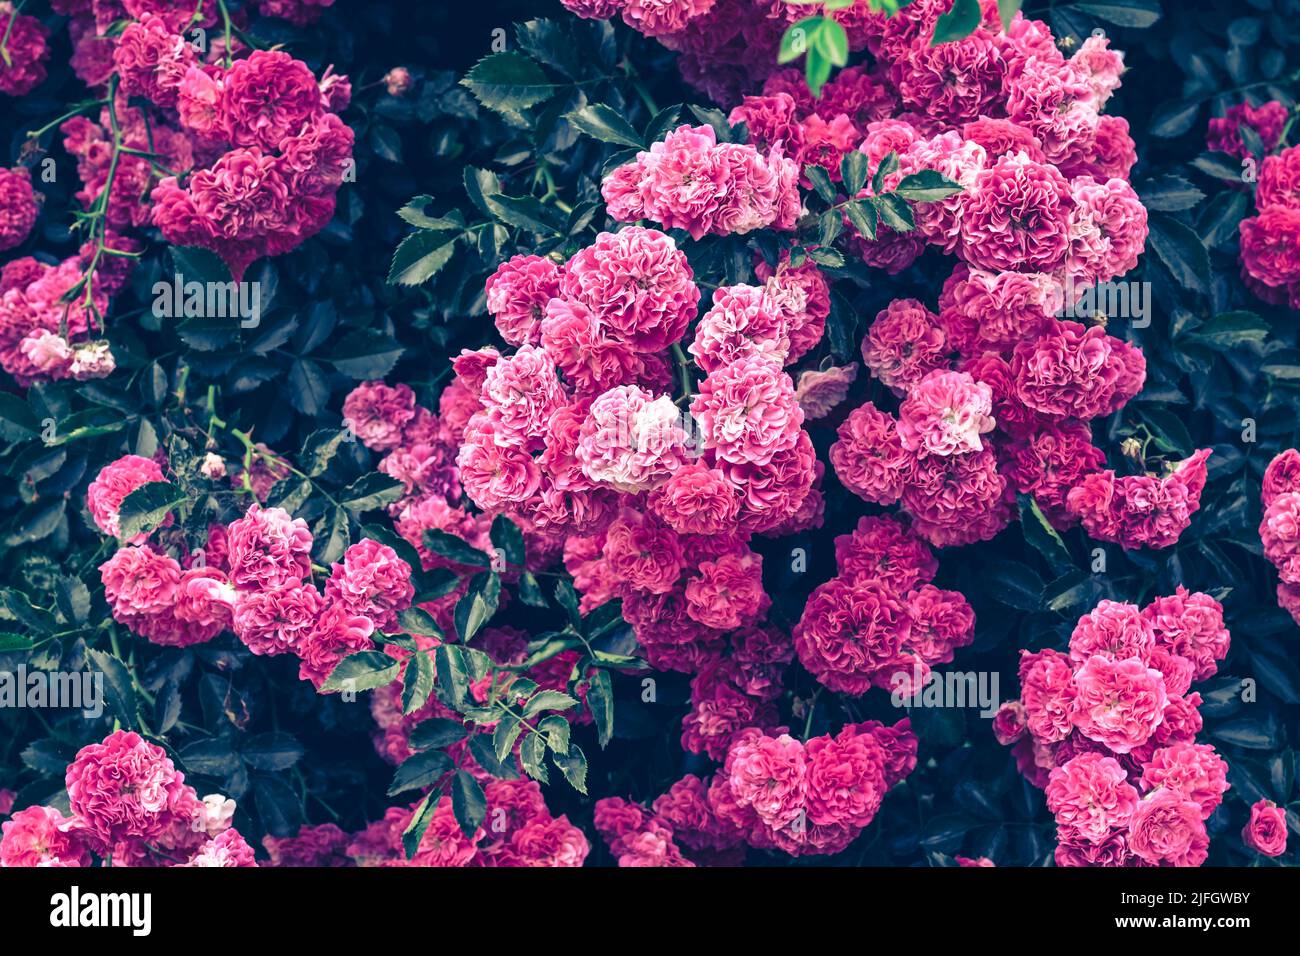 Background of pink bush roses close-up. Texture of greenery and flowers in garden. Beautiful bright colors. Template for greeting card design. Floral Stock Photo